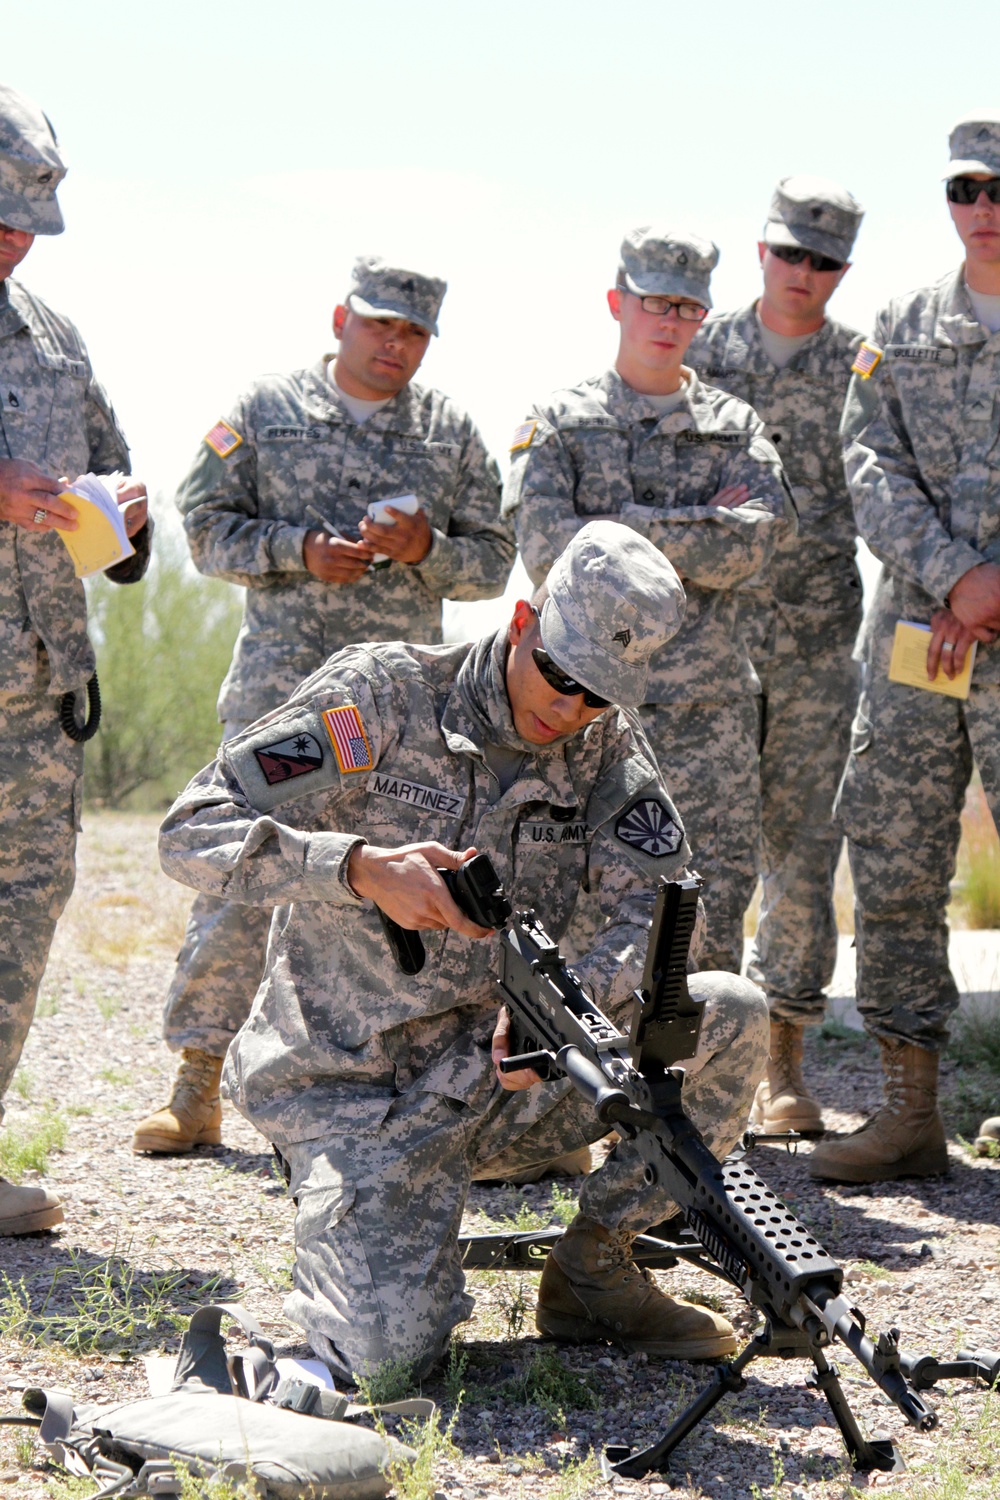 Ariz. Guard members practice training, time and safety